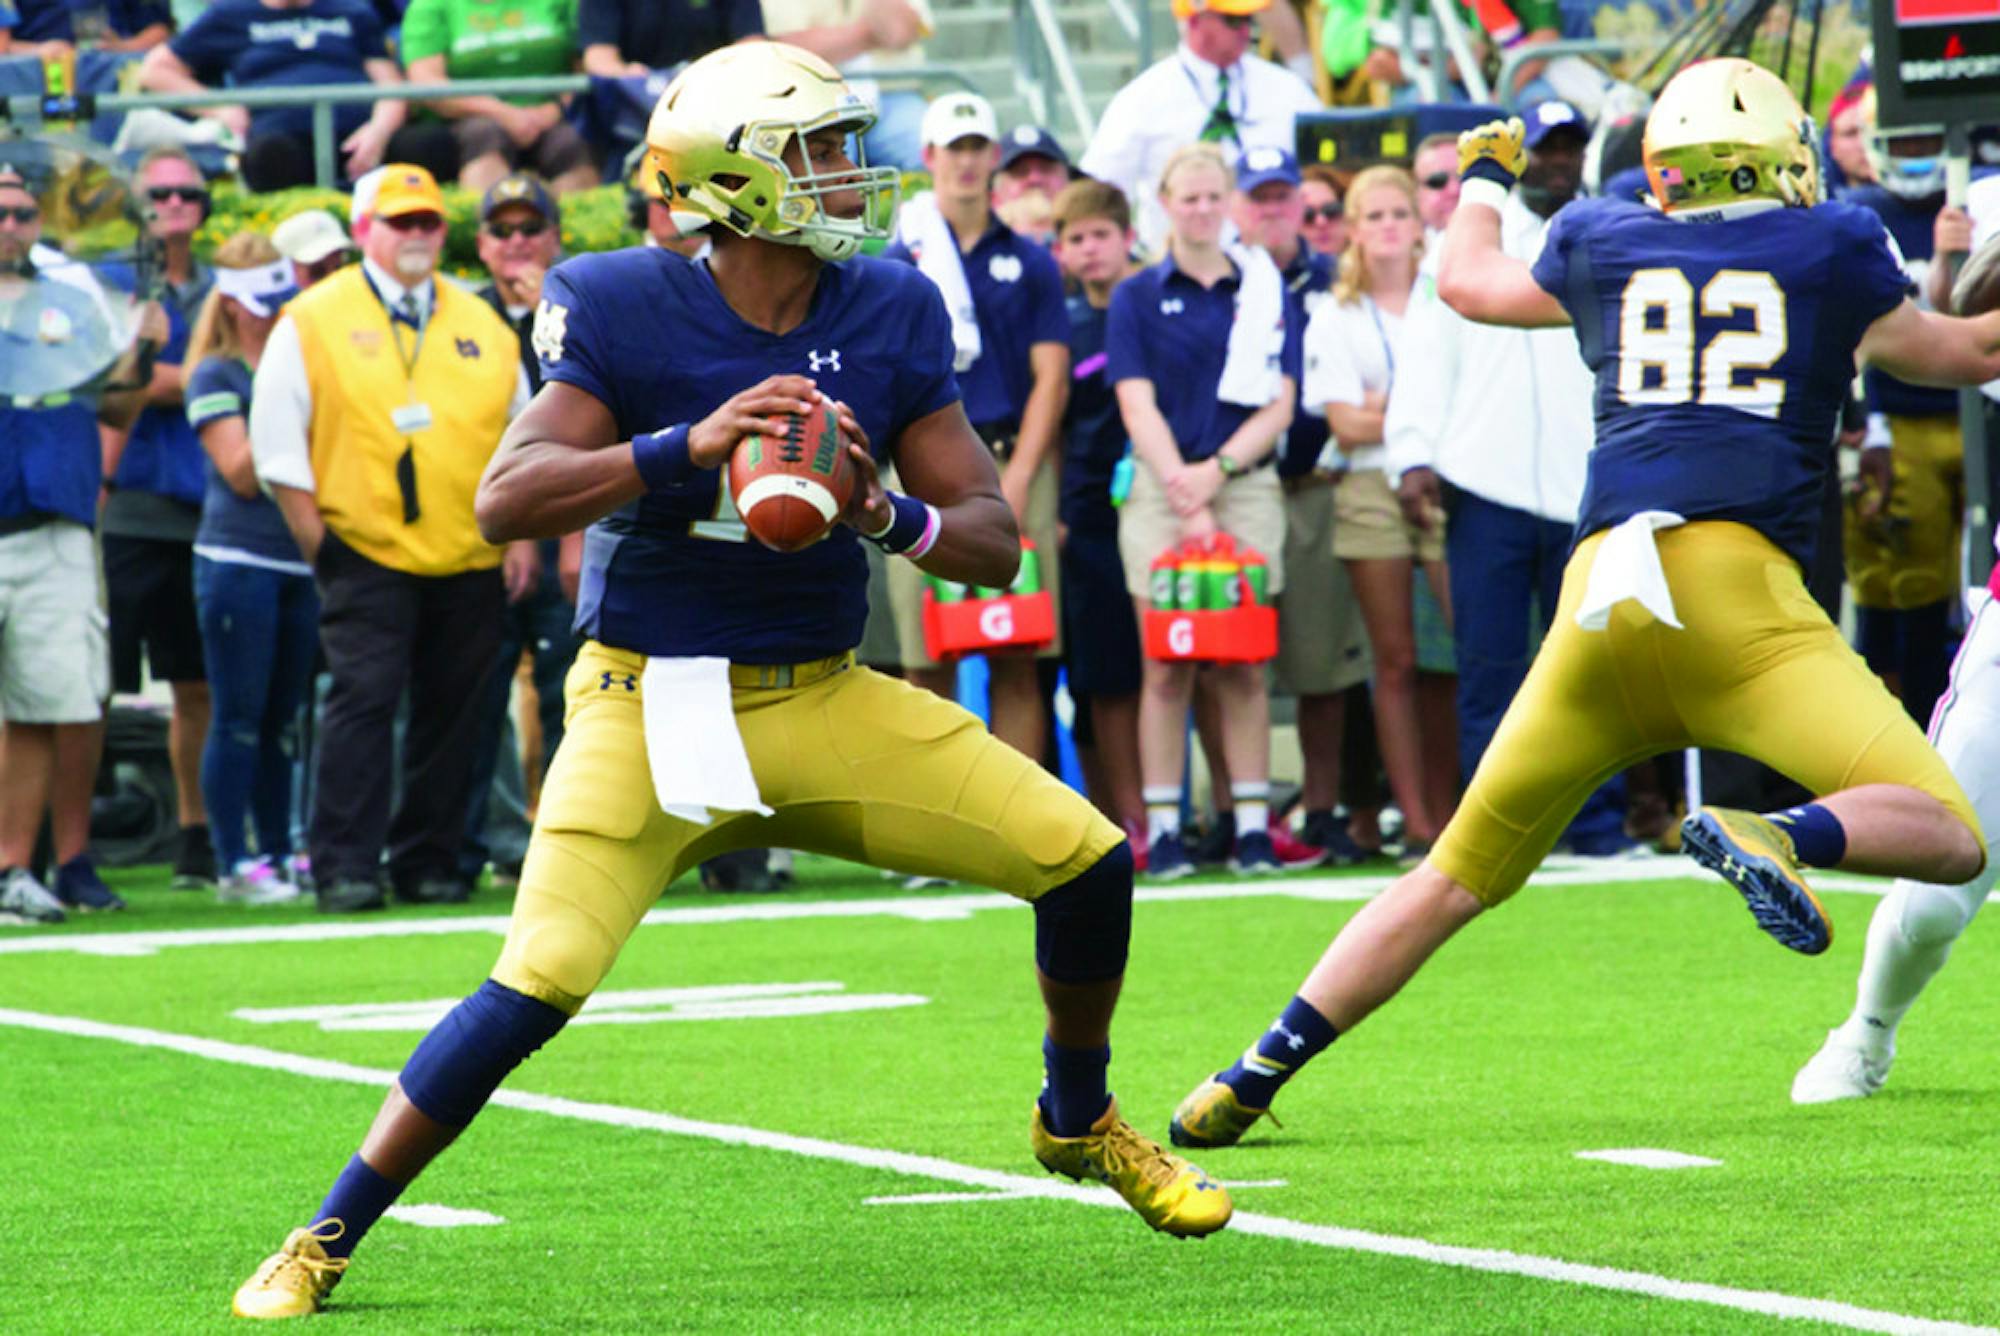 Irish sophomore quarterback DeShone Kizer fires a pass downfield during Notre Dame’s 62-27 home       victory over Massachusetts on Saturday.